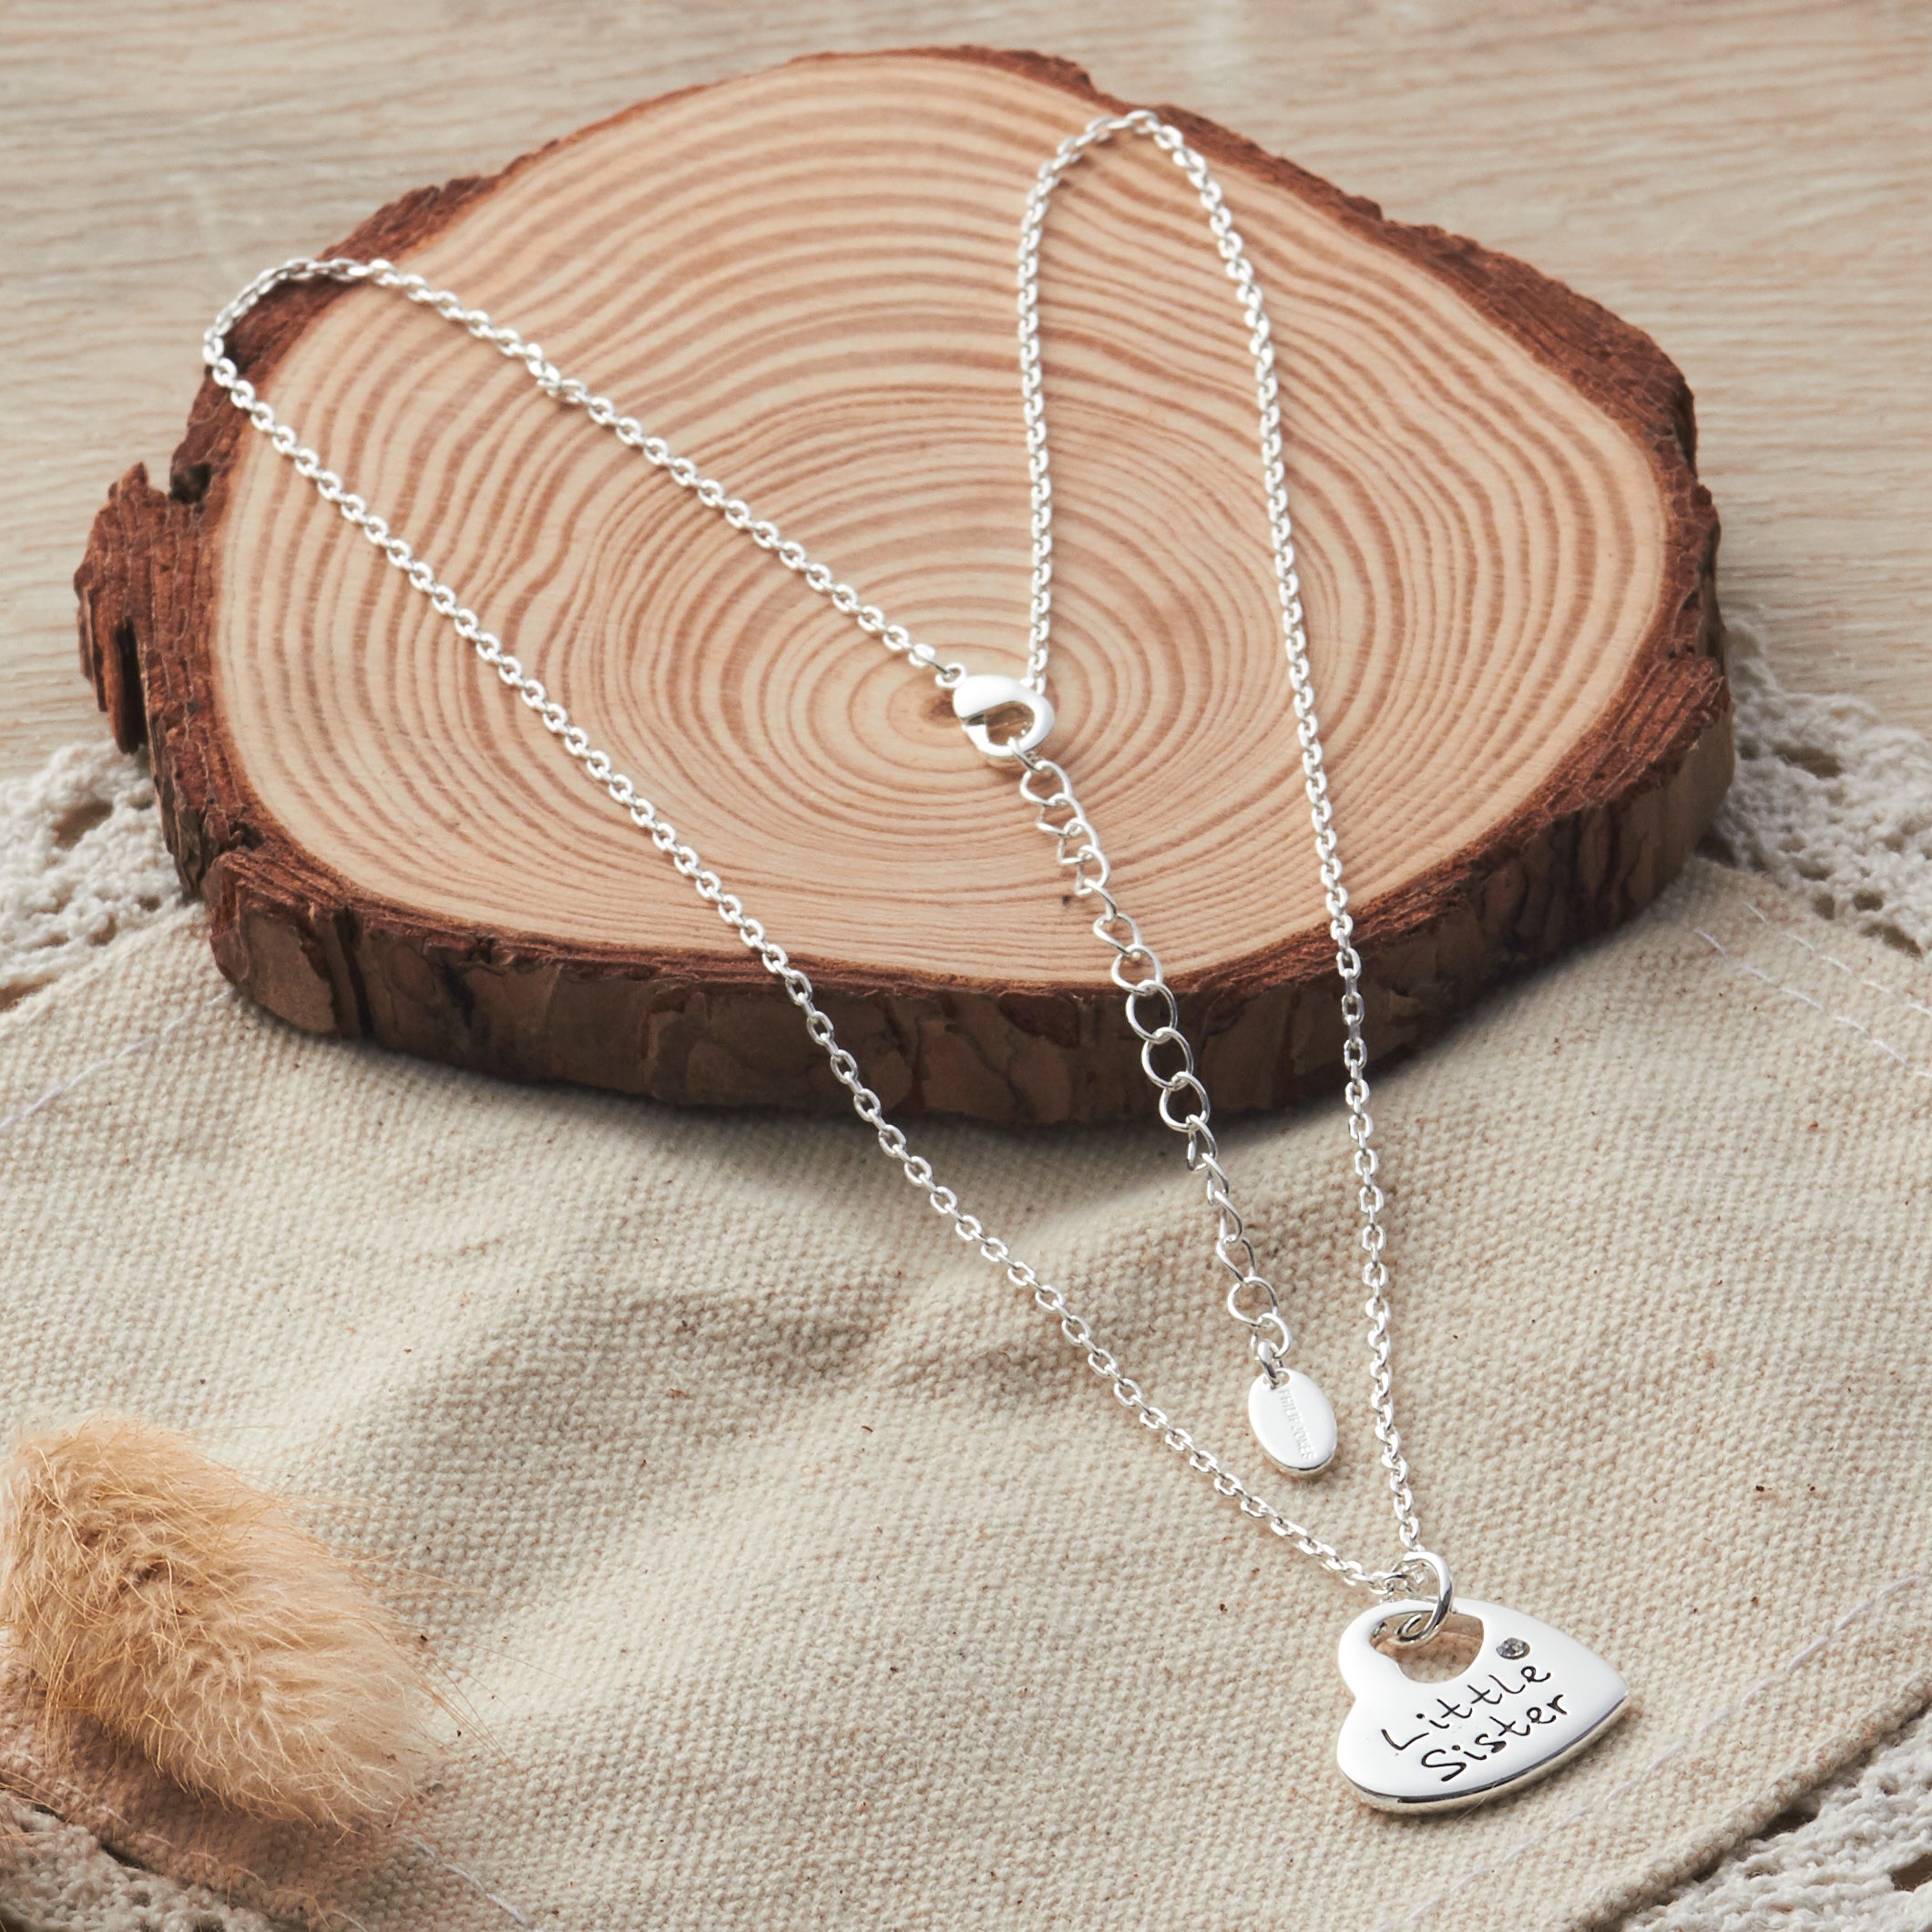 Little Sister Heart Necklace with Quote Card Created with Zircondia® Crystals